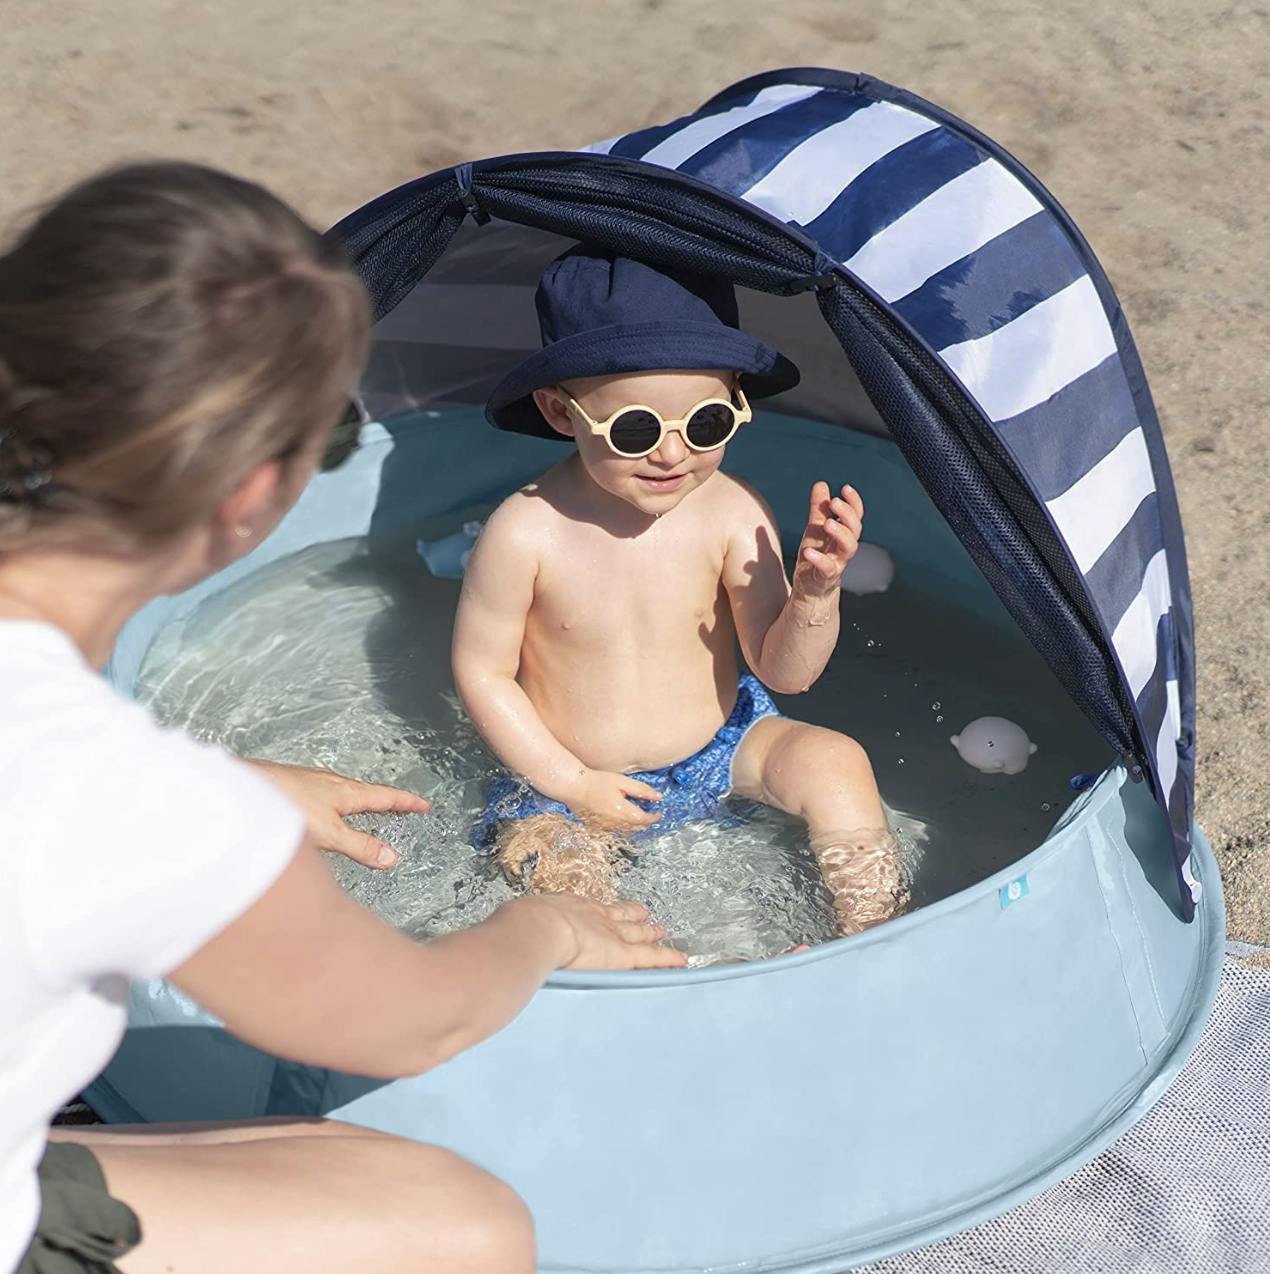 Babymoov Aquani Tent & Pool - 3 in 1 Pop Up Tent, Kiddie Pool and Play Yard · Blue/White